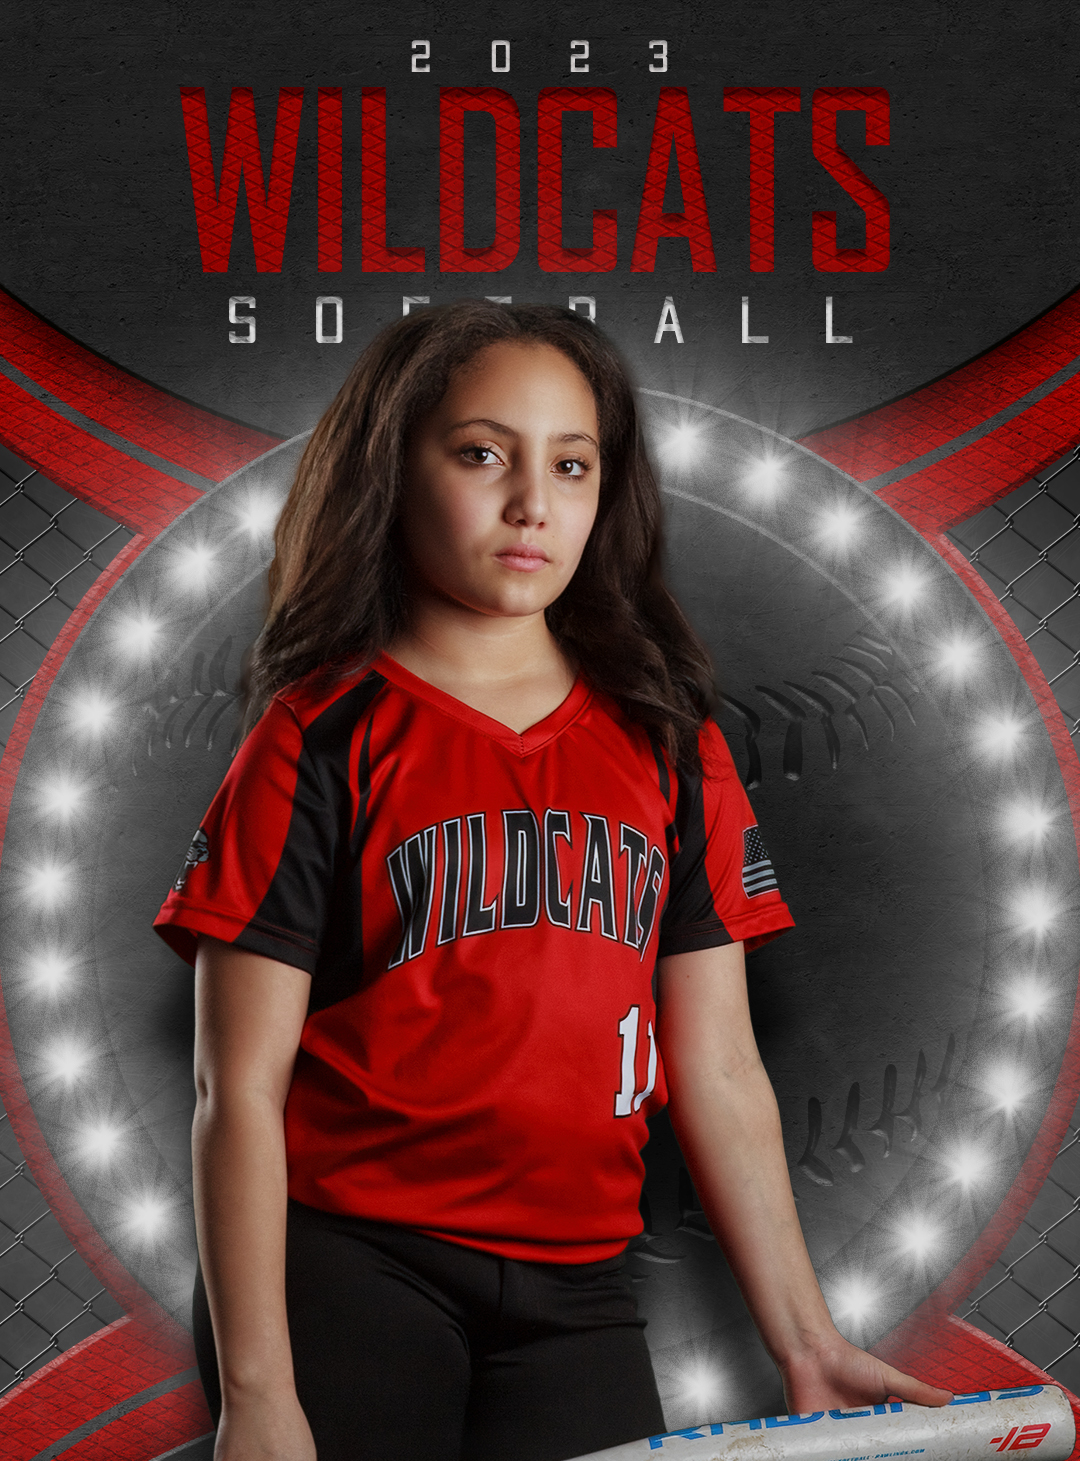 Photo a Wildcats teenage female softball player photographed by Design by Sheila sports photographer